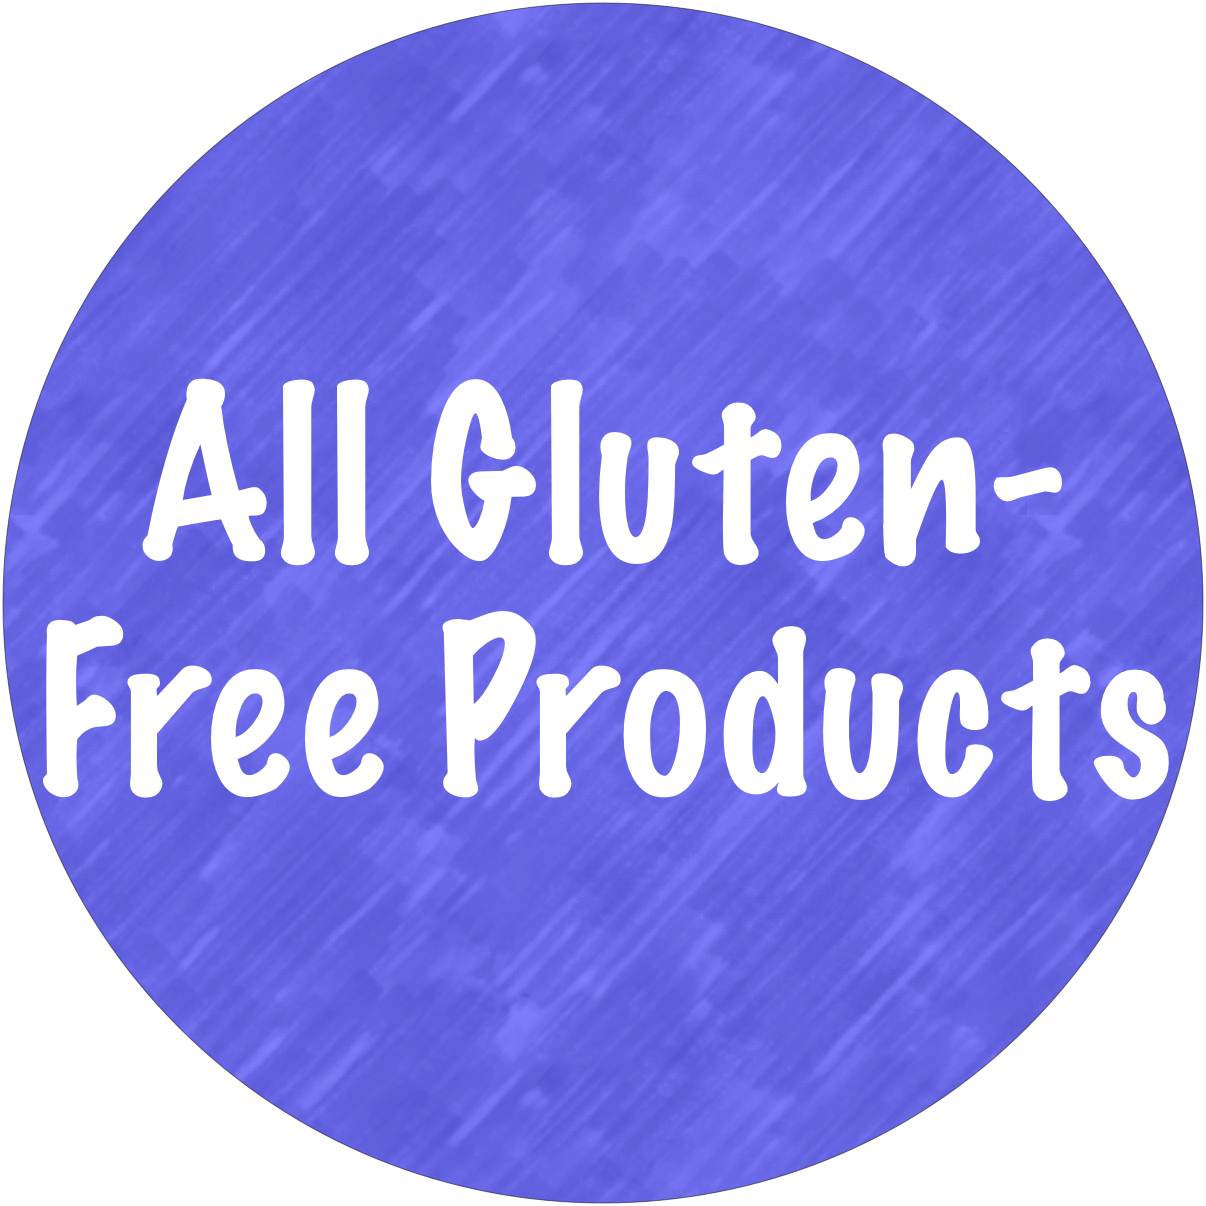 All Products - Gluten Free